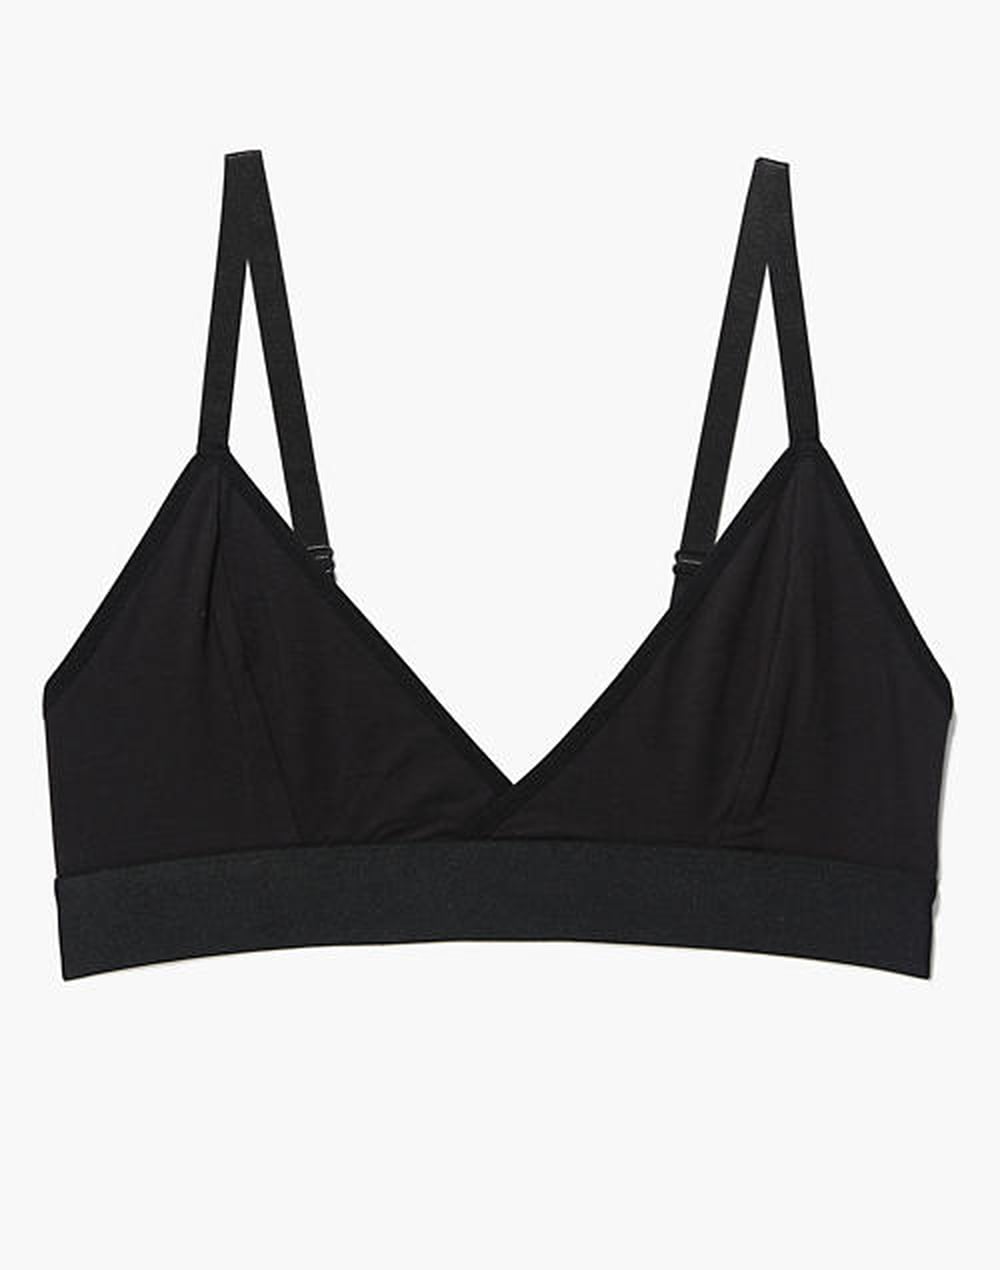 11 Ways to Style Your Lingerie For Every Day | POPSUGAR Fashion